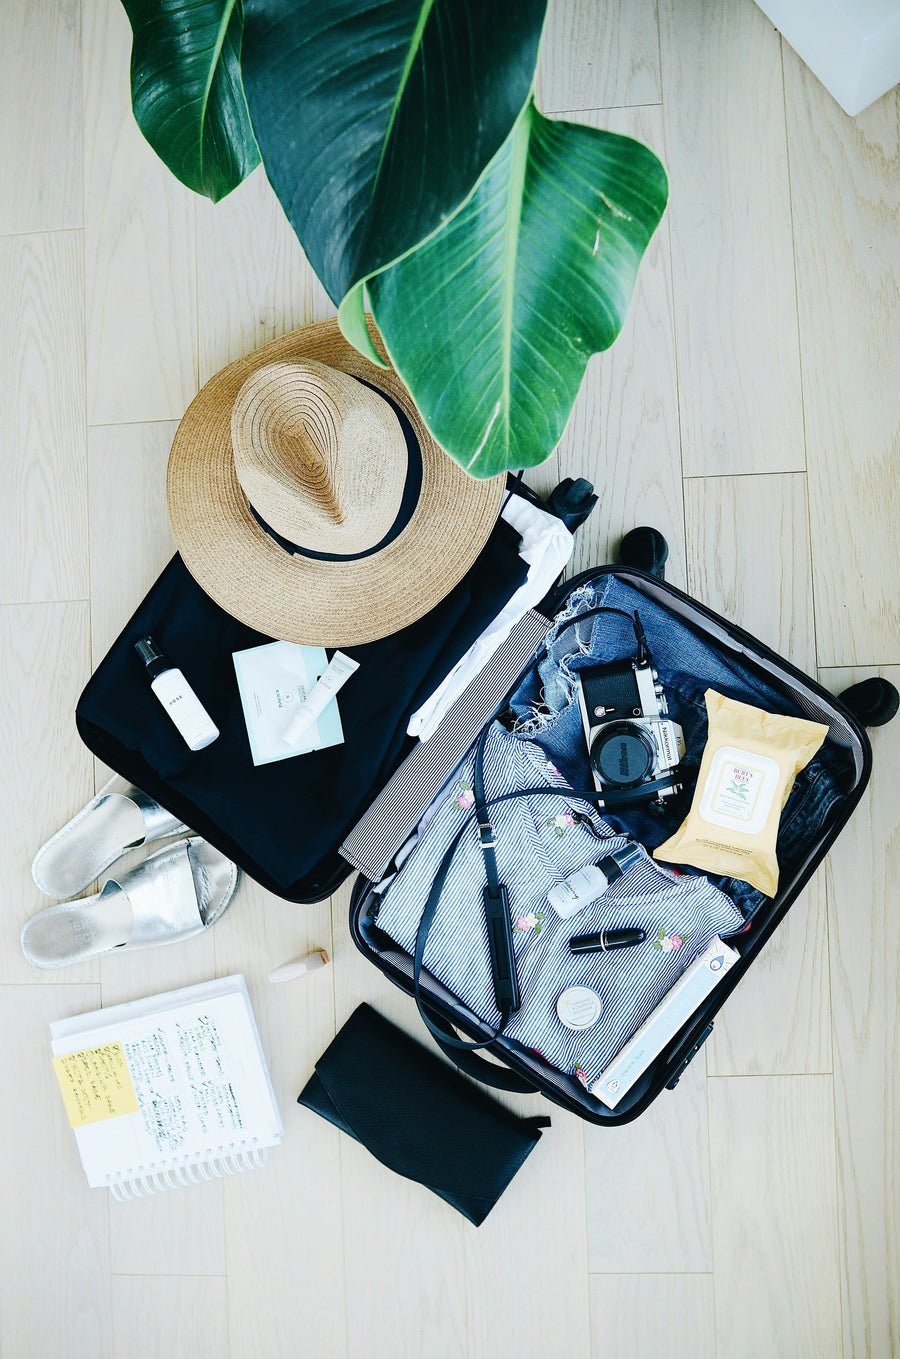 Elevate your travel with our smart travel accessories for a first-class experience! From luggage trackers to noise-canceling earbuds, travel in style effortlessly.